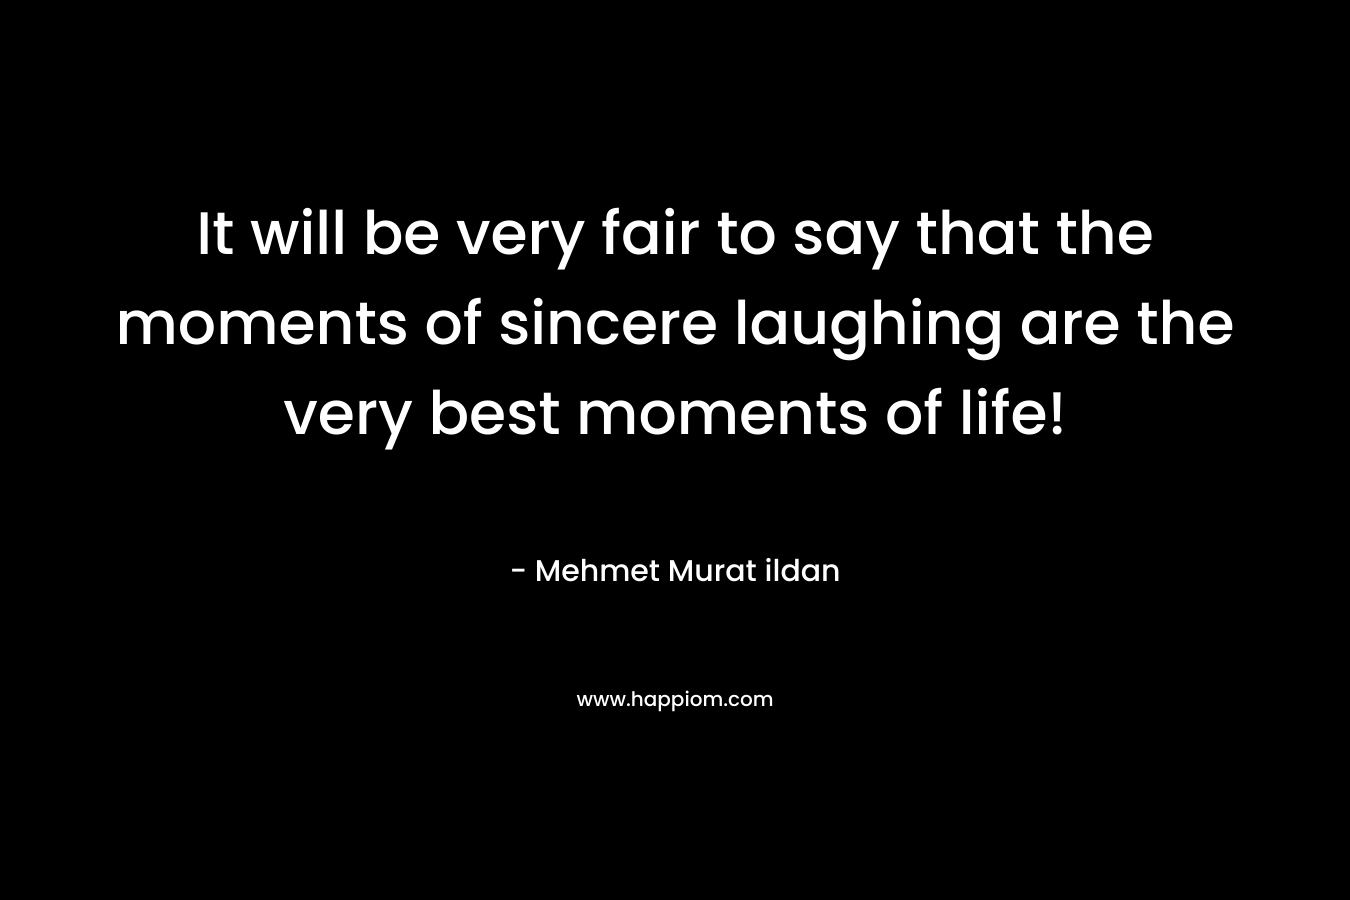 It will be very fair to say that the moments of sincere laughing are the very best moments of life!